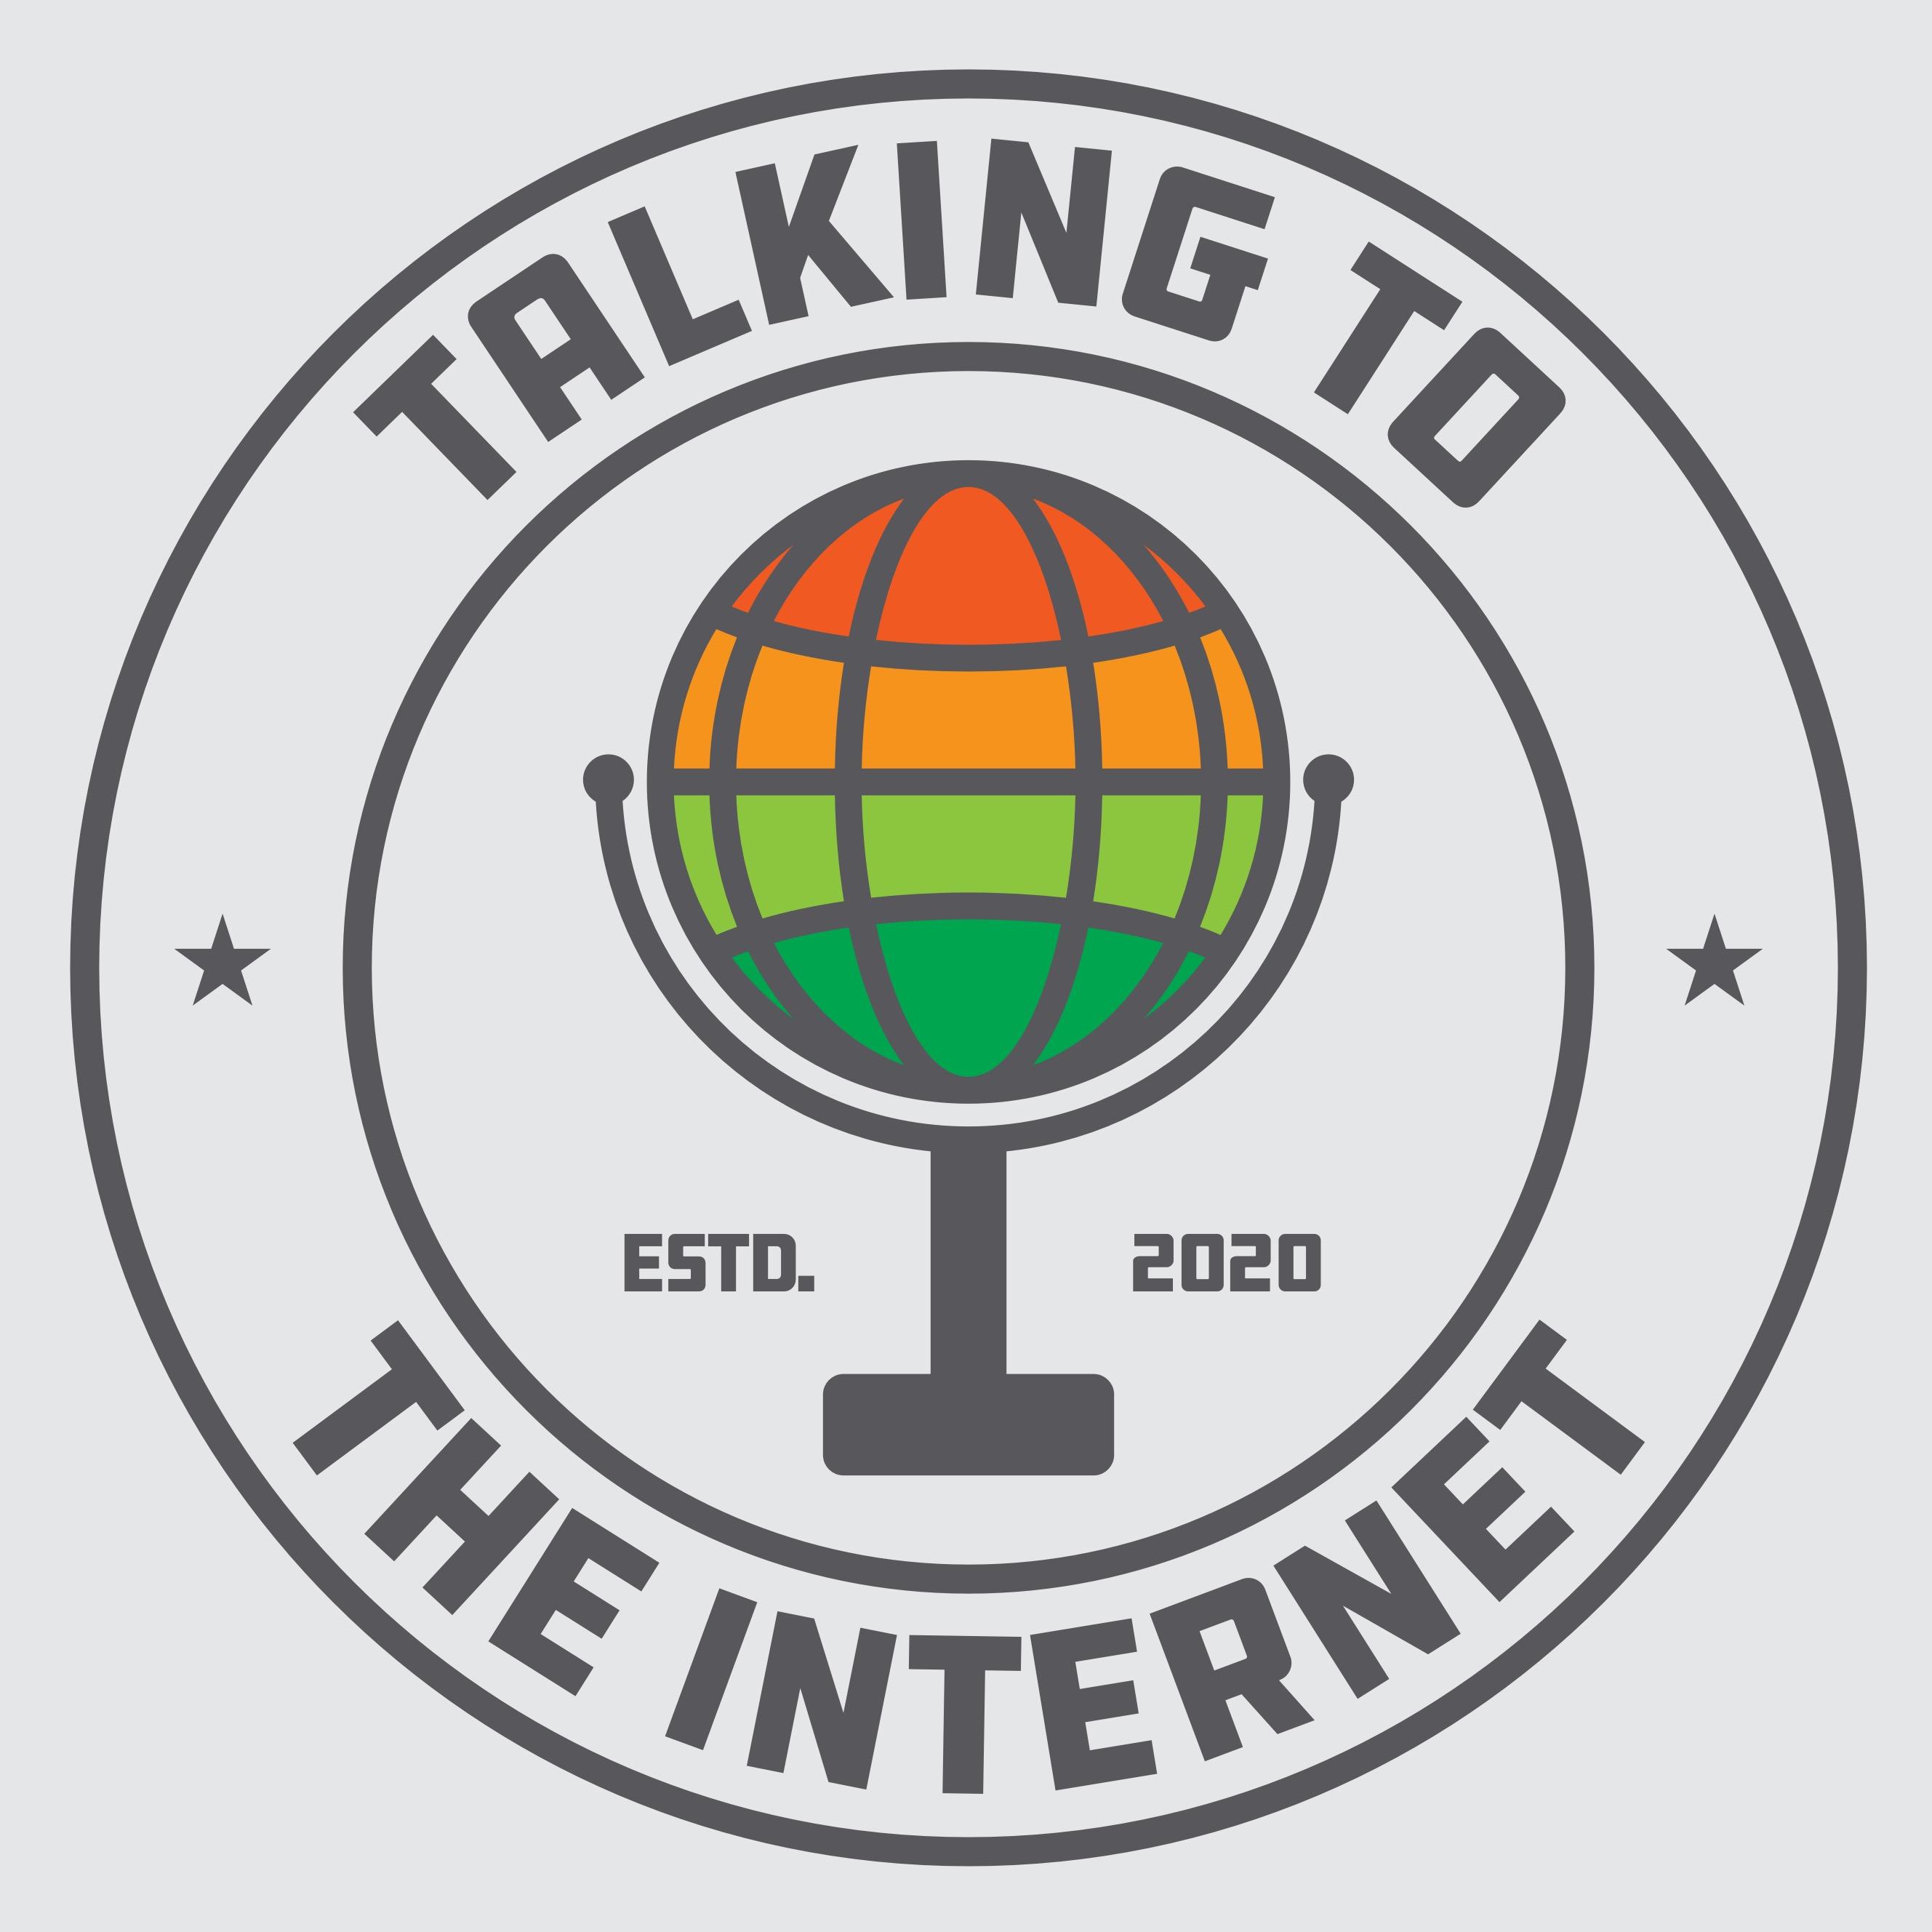 Talking To The Internet